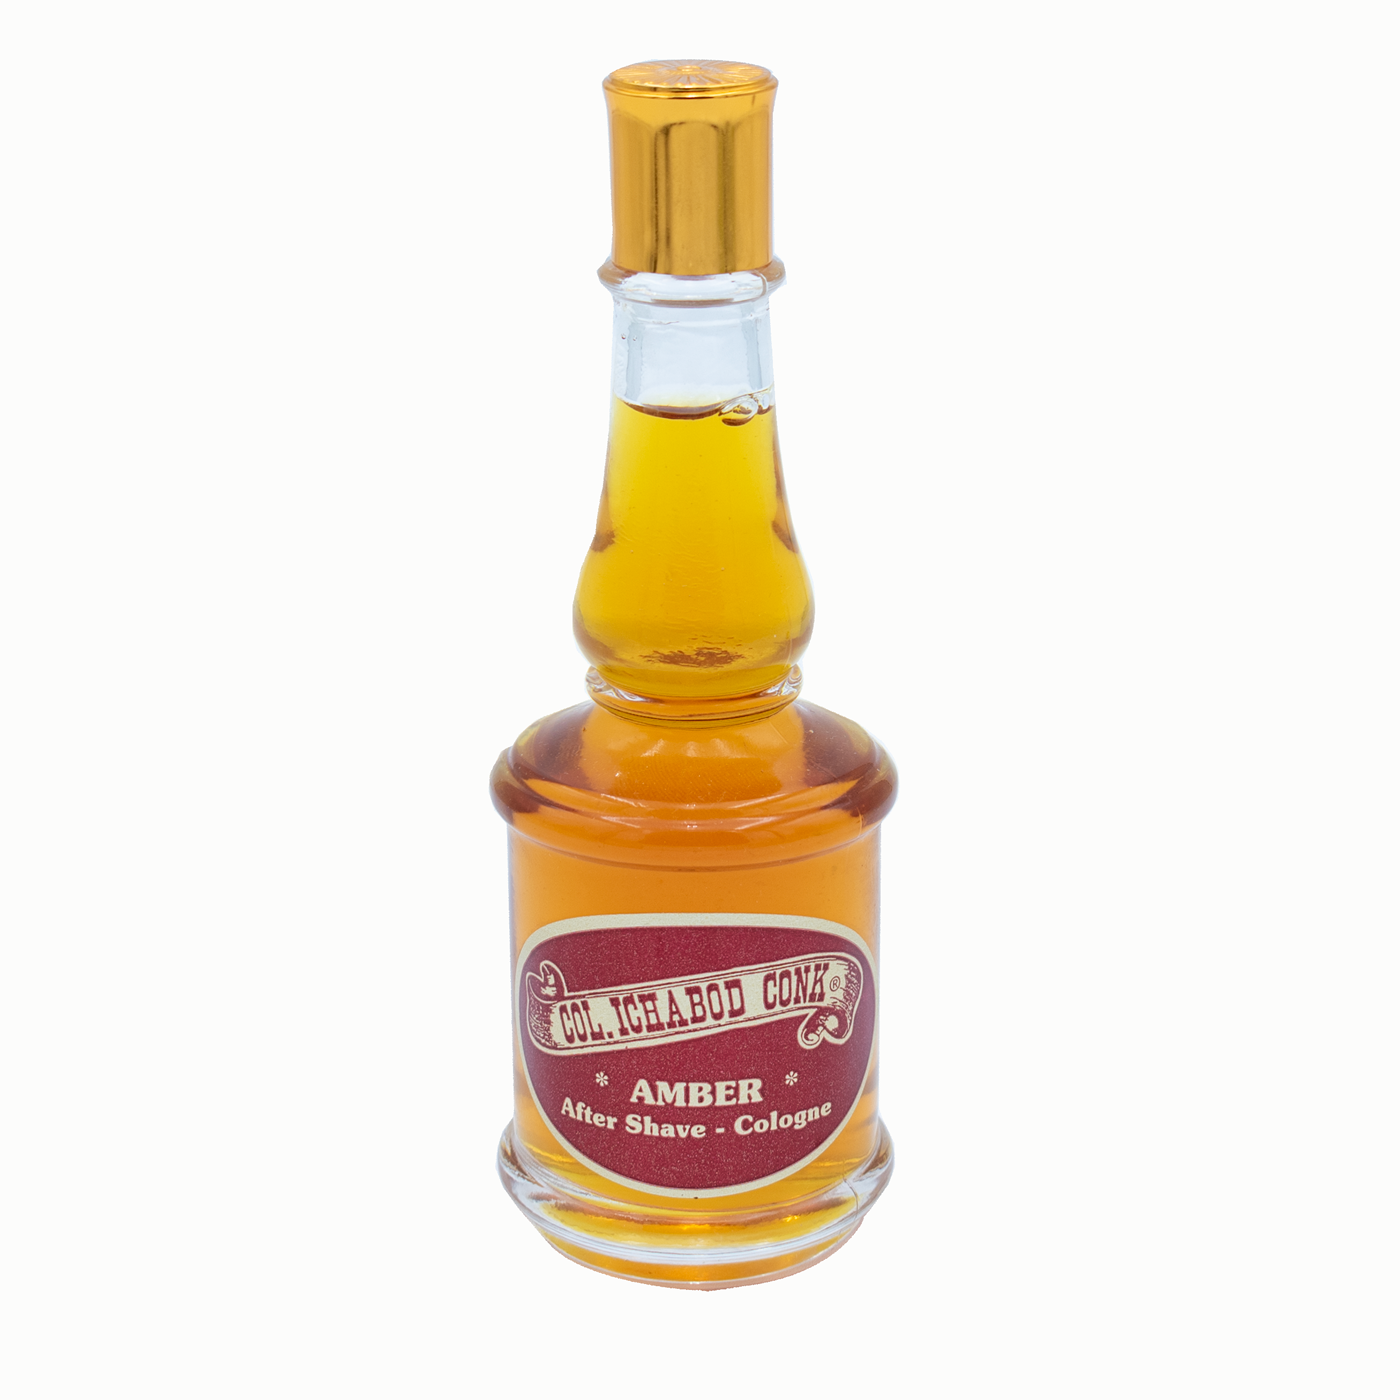 Colonel Conk Amber After Shave Cologne